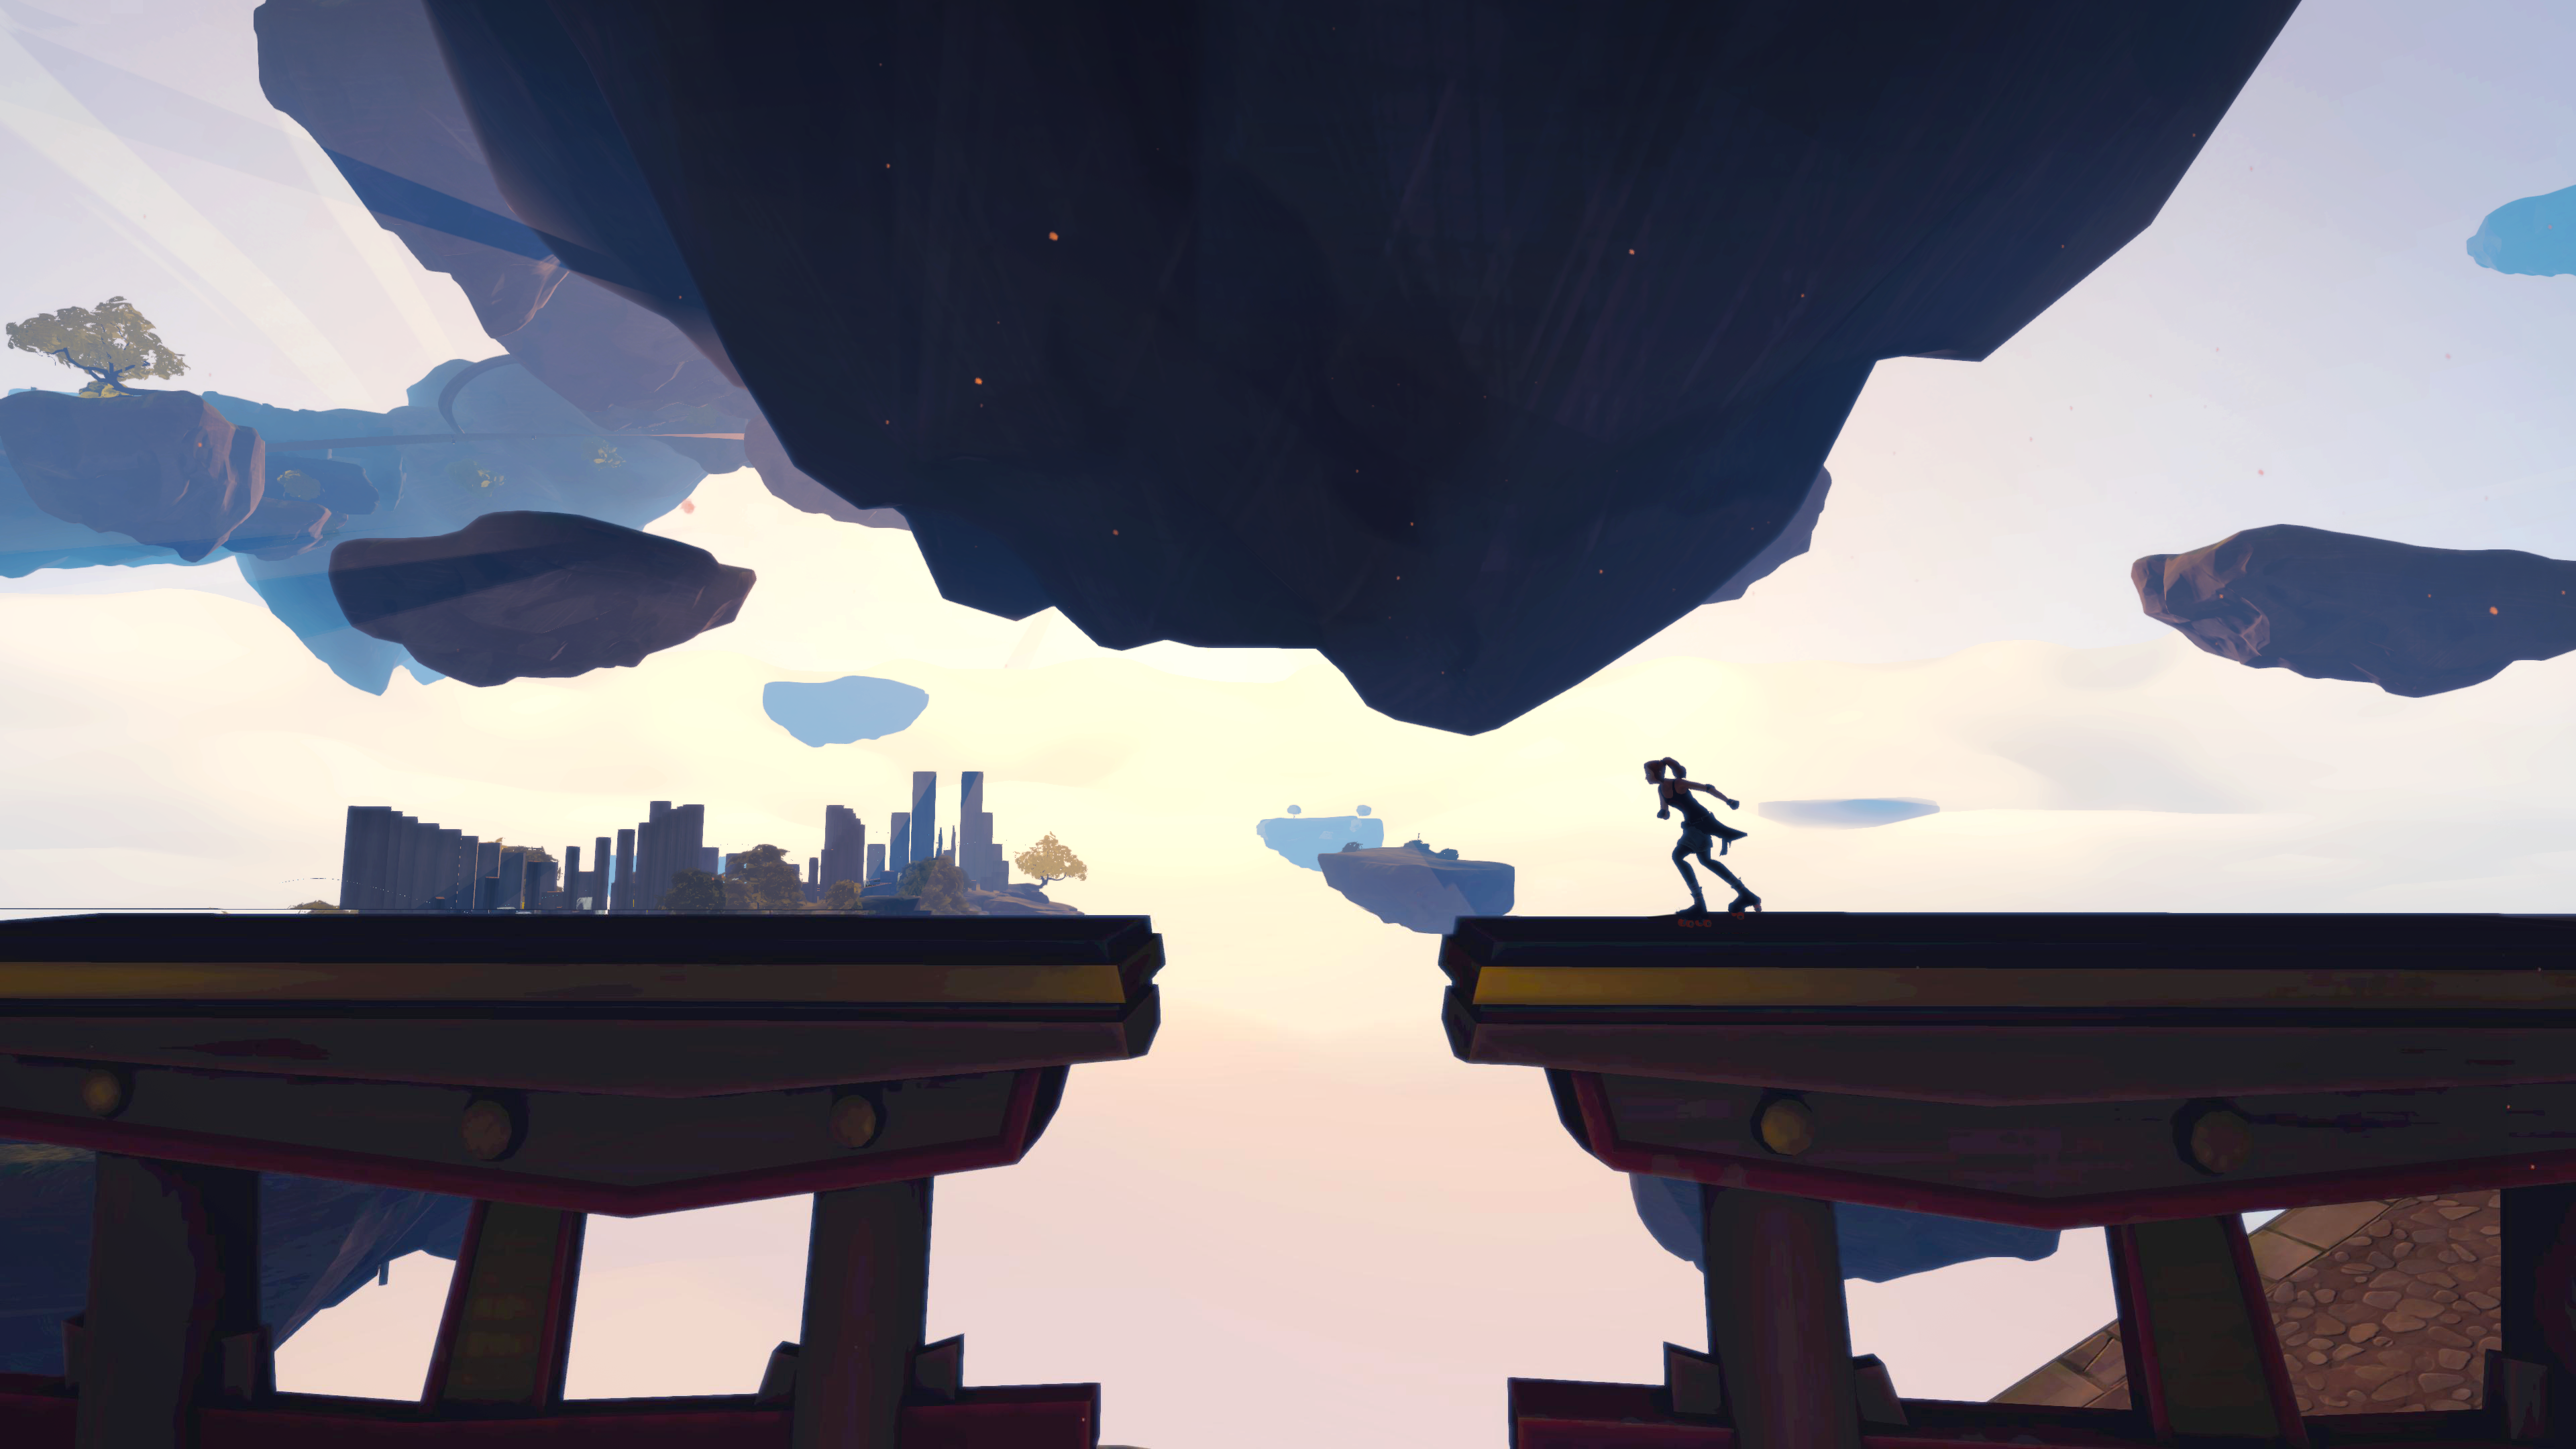 A Giant Zoe is about to jump over a gap and destroy a city while roller blading next to some floating lands